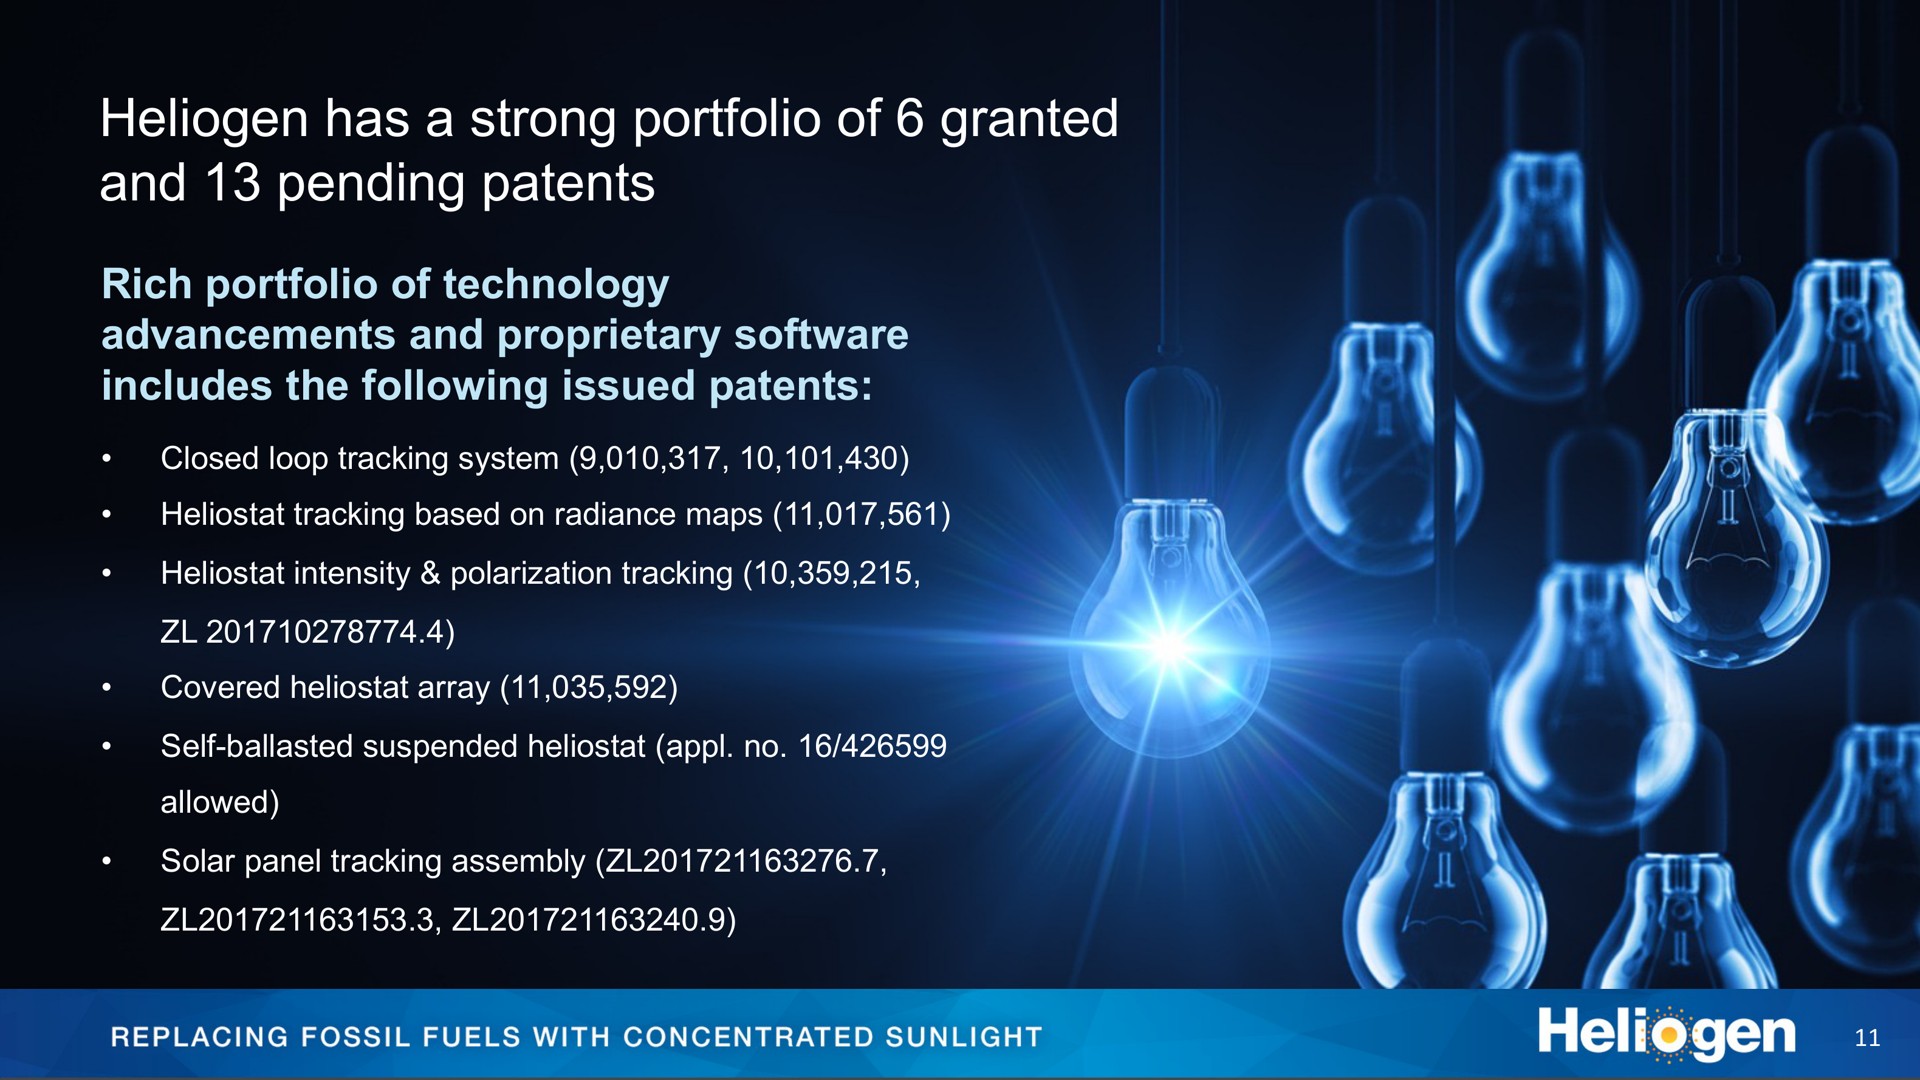 has a strong portfolio of granted and pending patents rich portfolio of technology advancements and proprietary includes the following issued patents | Heliogen